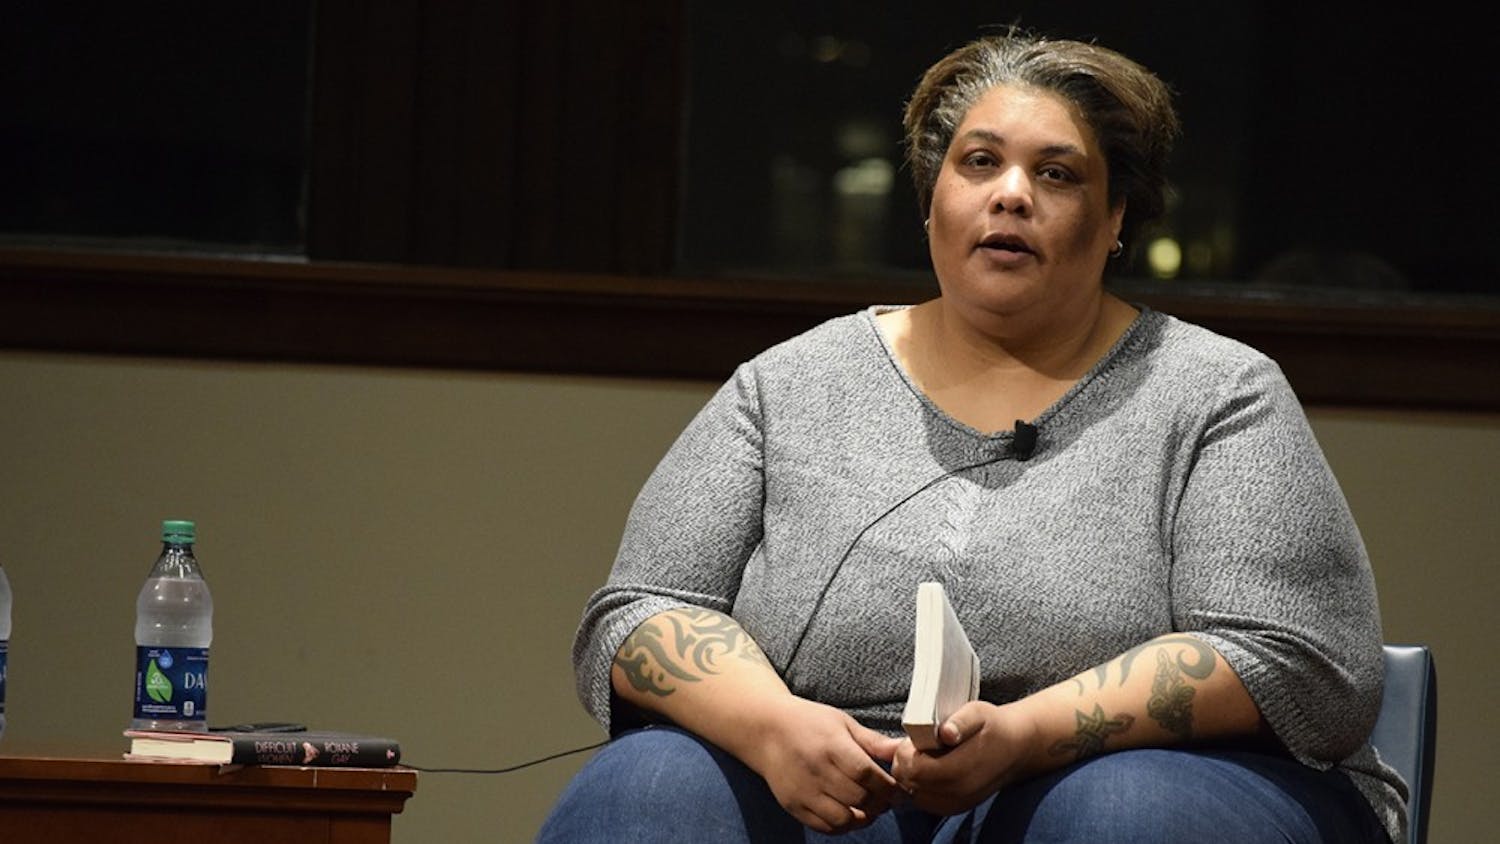 Roxane Gay discusses a couple of her bestselling books. After she introduces herself she comments, "I've written some books, so what?" 